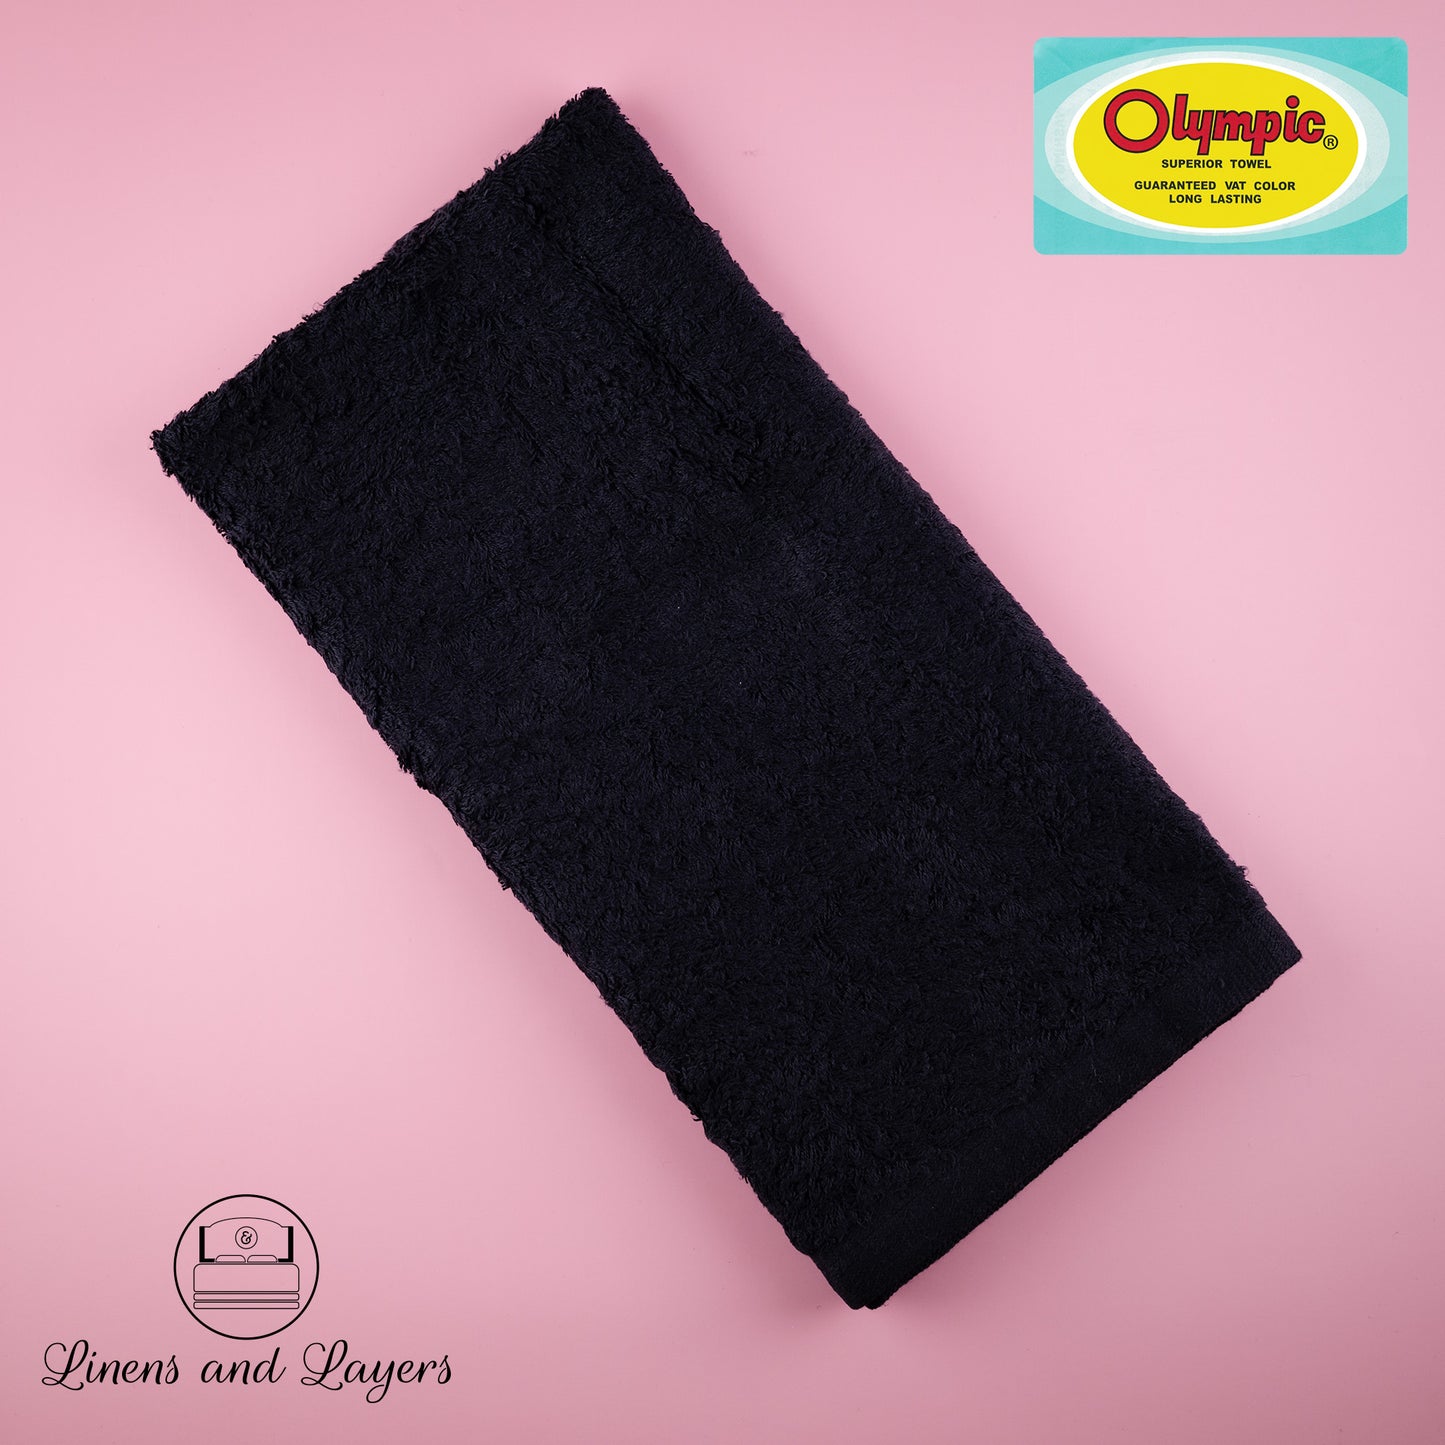 Olympic Black Hand Towel / Salon Towel / Spa Towel (492 GSM) - DK-1427 Terrycloth - 14x27 inches